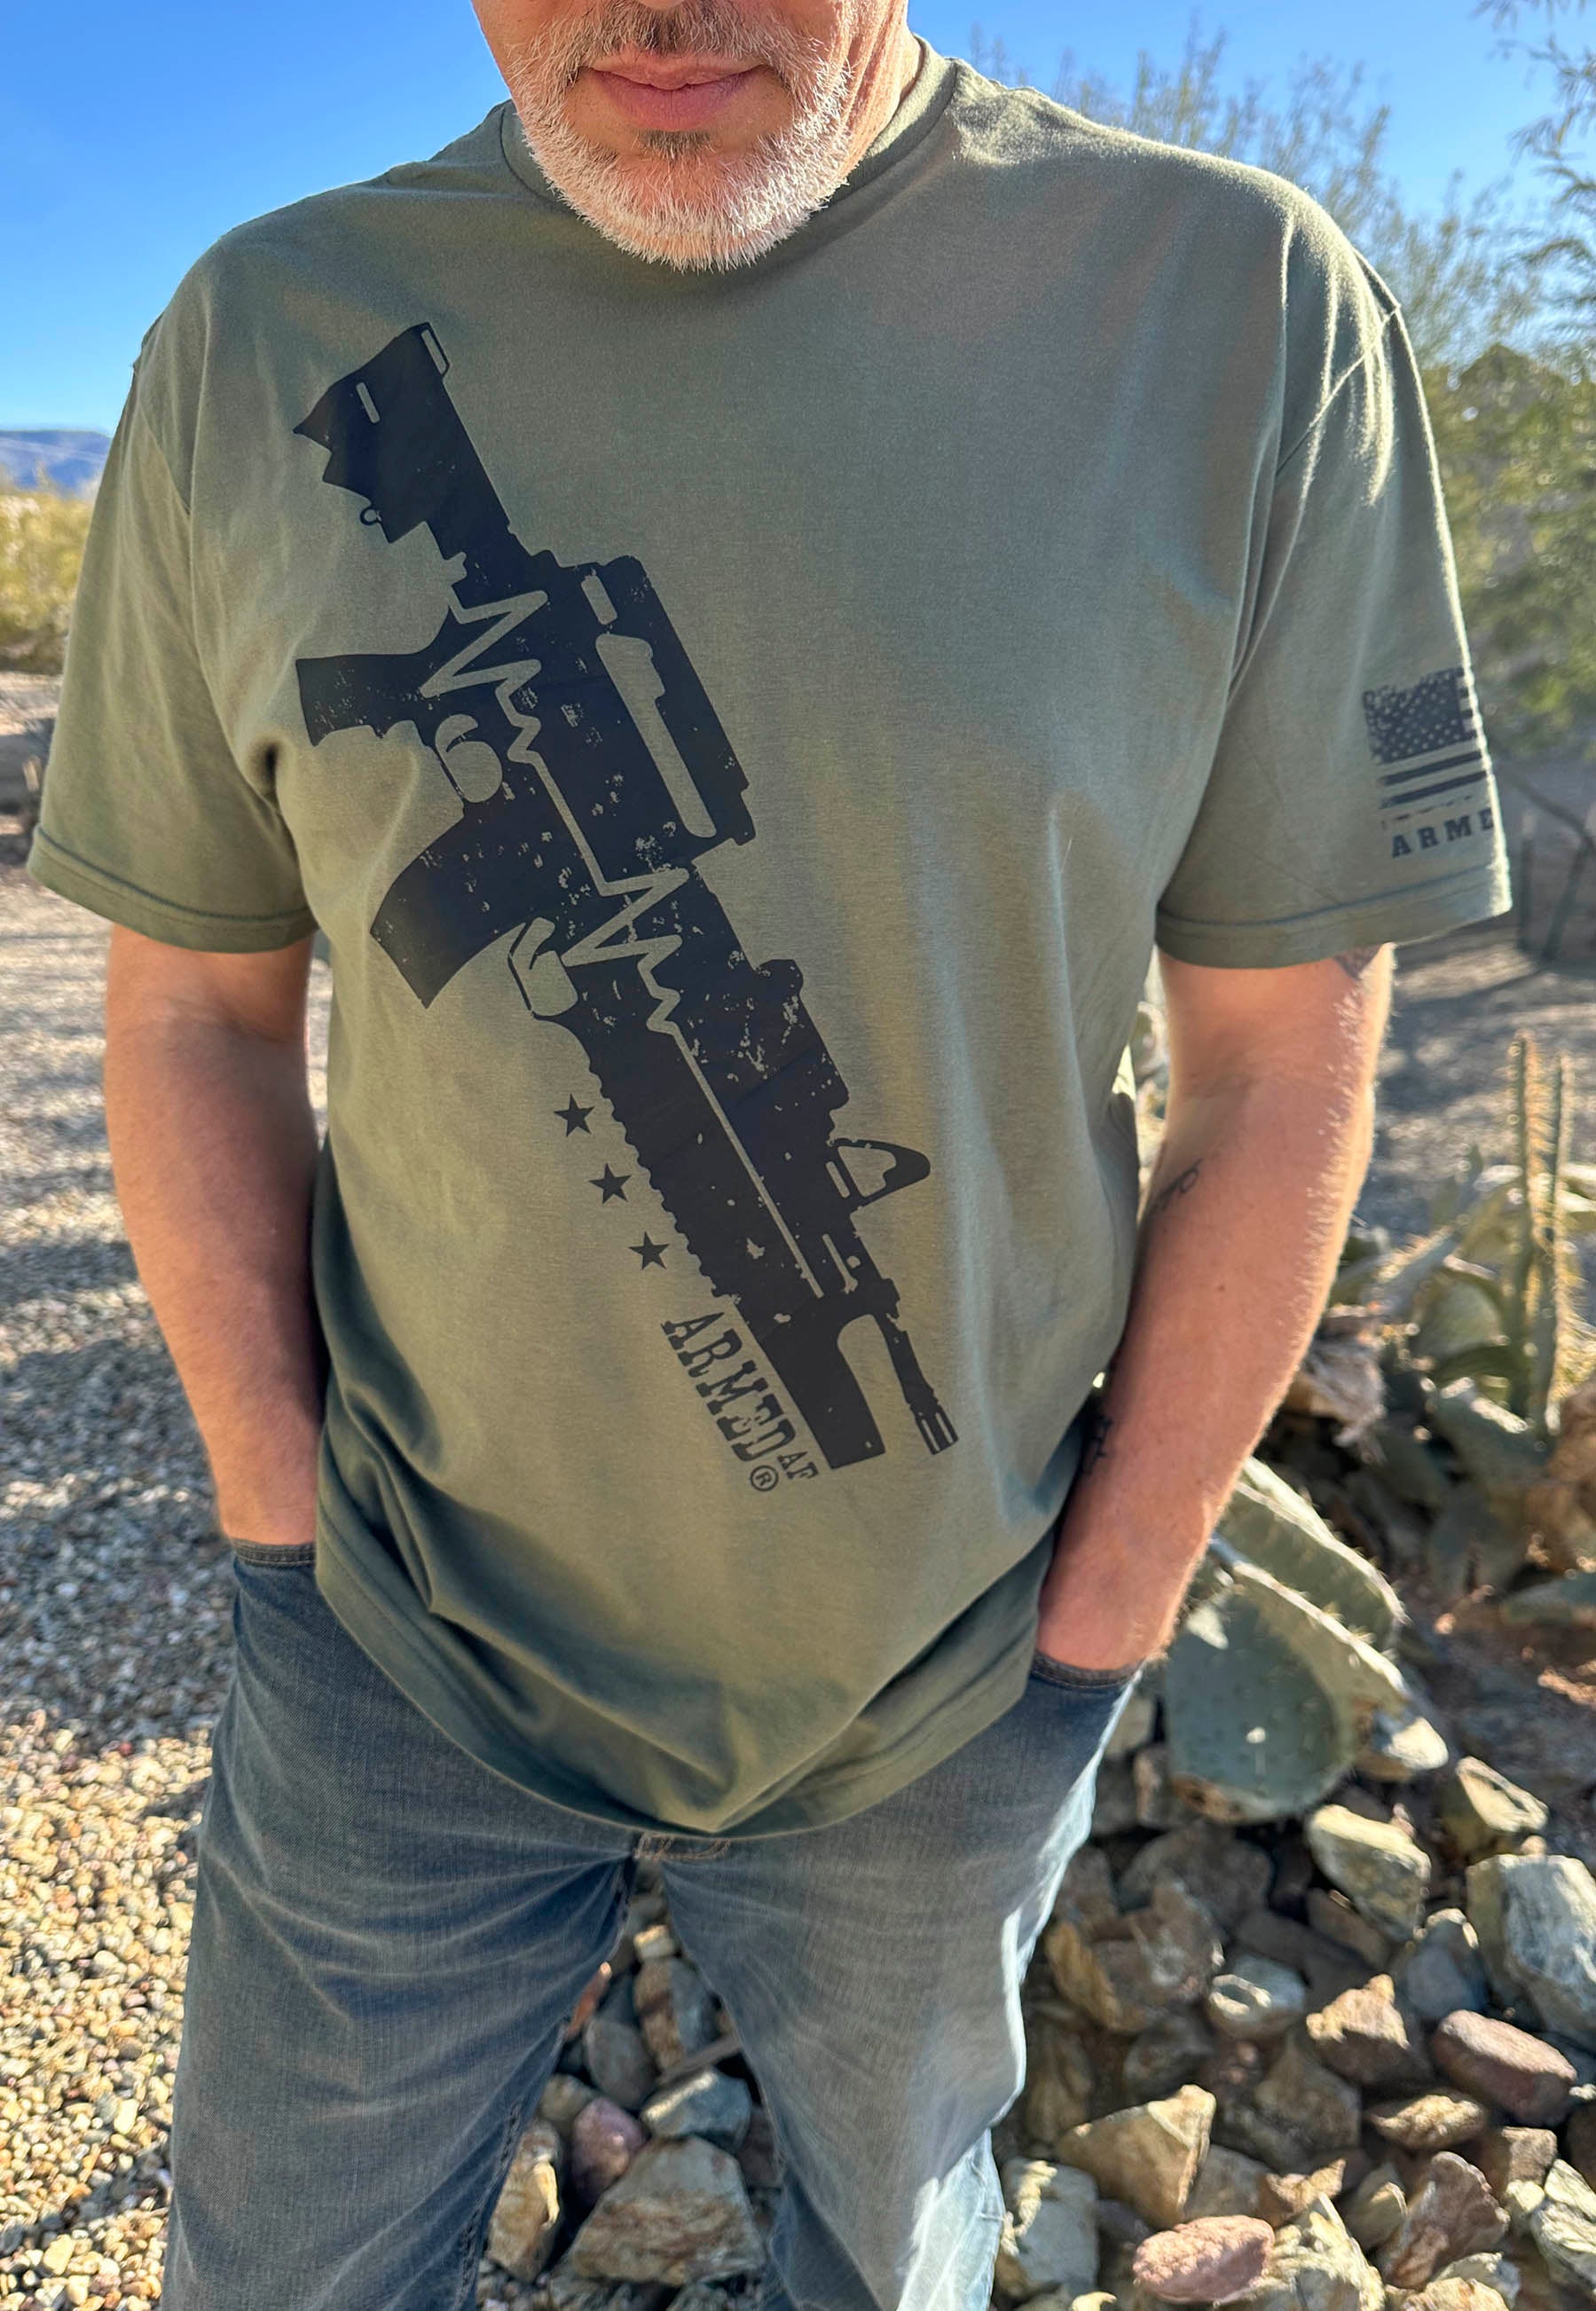 AR15 on a sling printed t-shirt on model